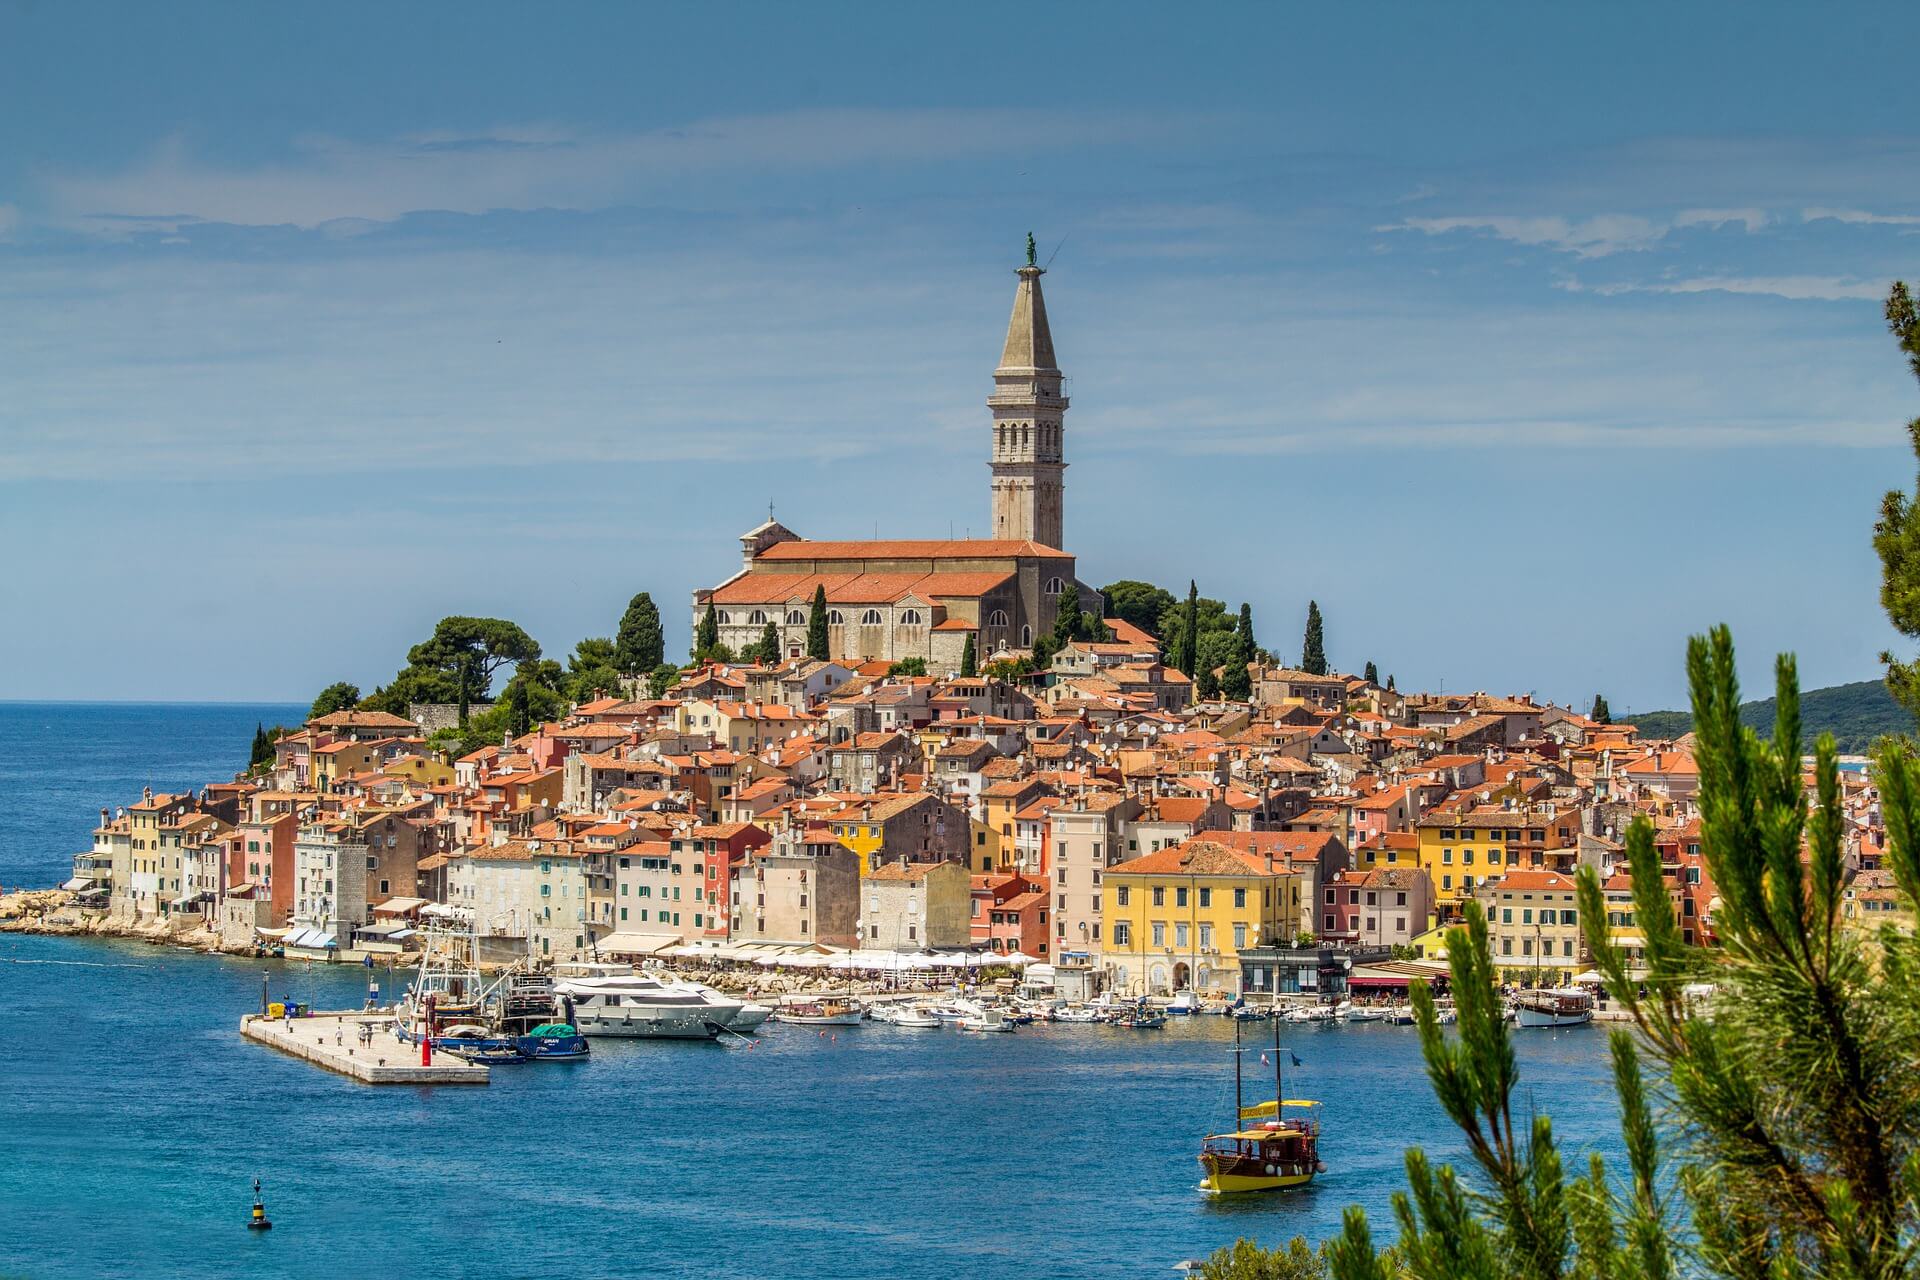 What makes Istria special